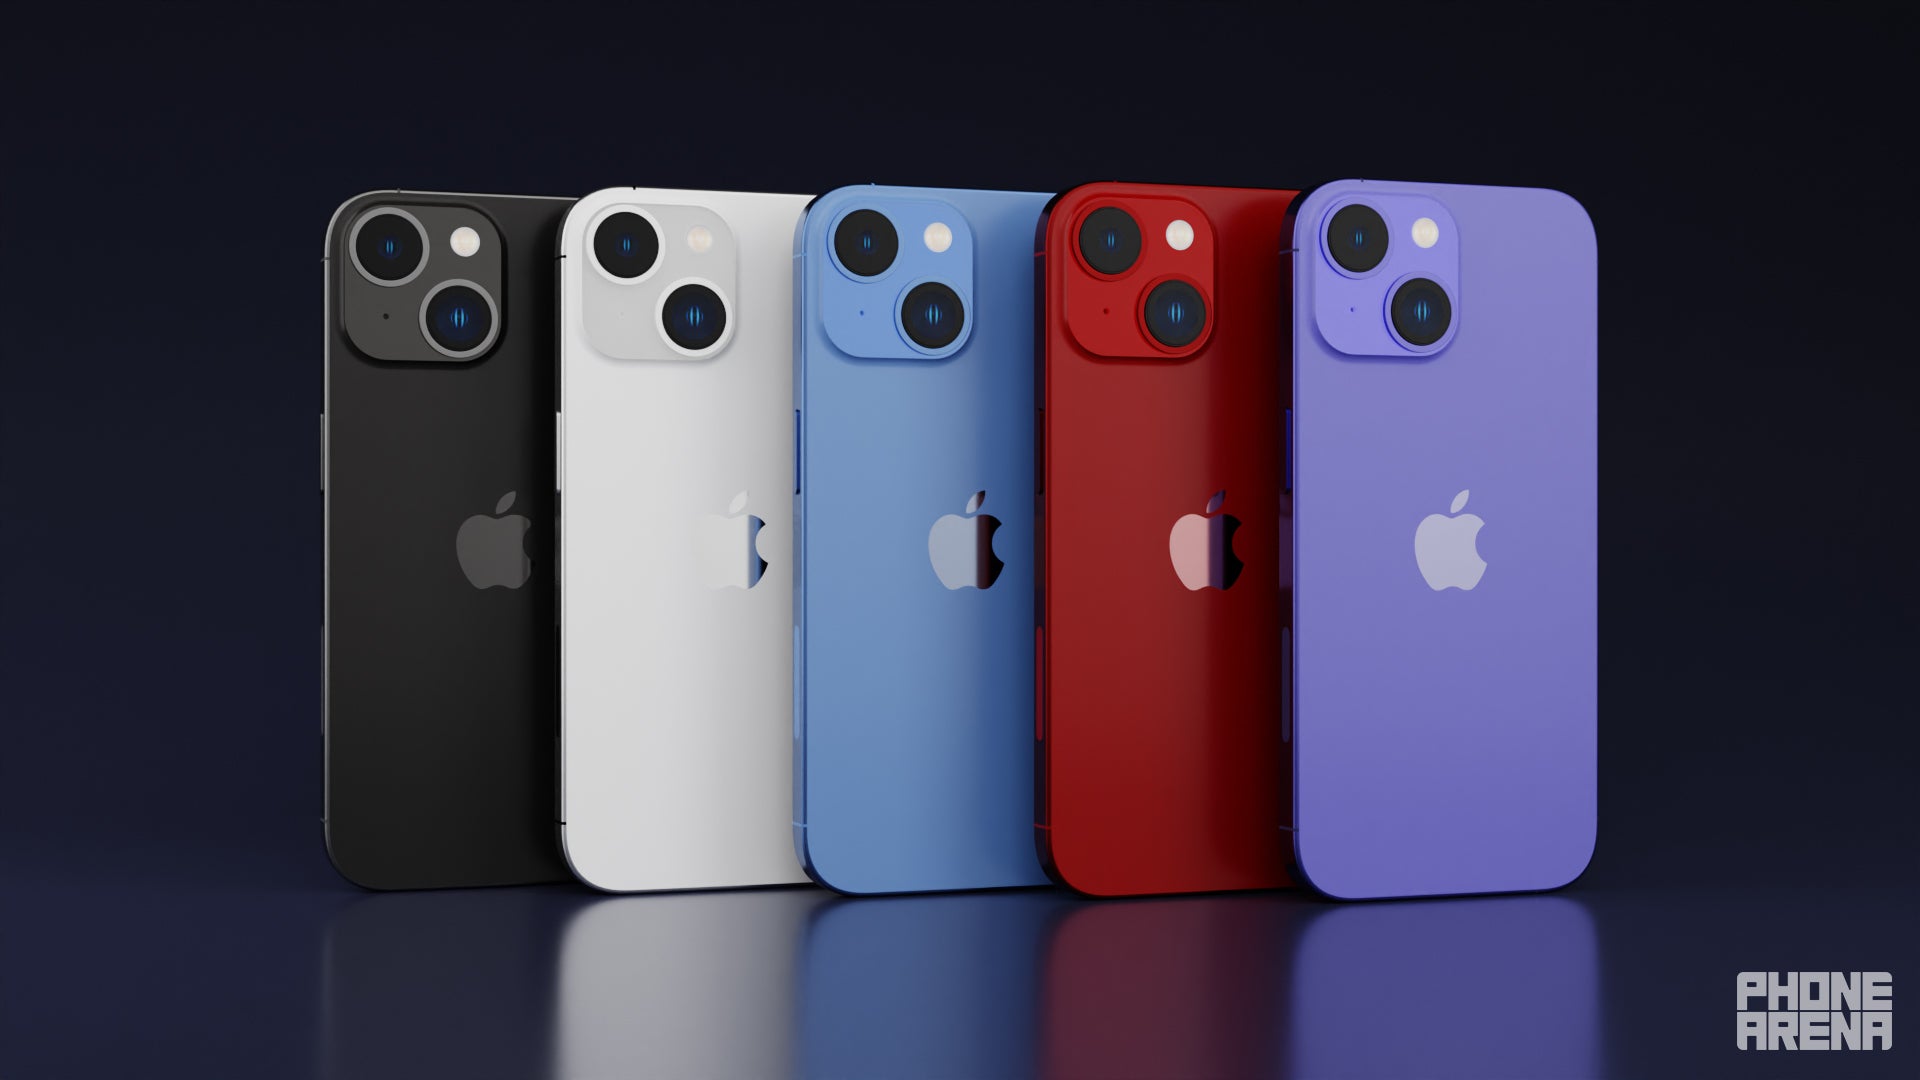 All expected iPhone 14 colors (Image Credit - Phone Arena)&quot;&amp;nbsp - iPhone 14 vs iPhone 14 Max: differences, expectations, predictions